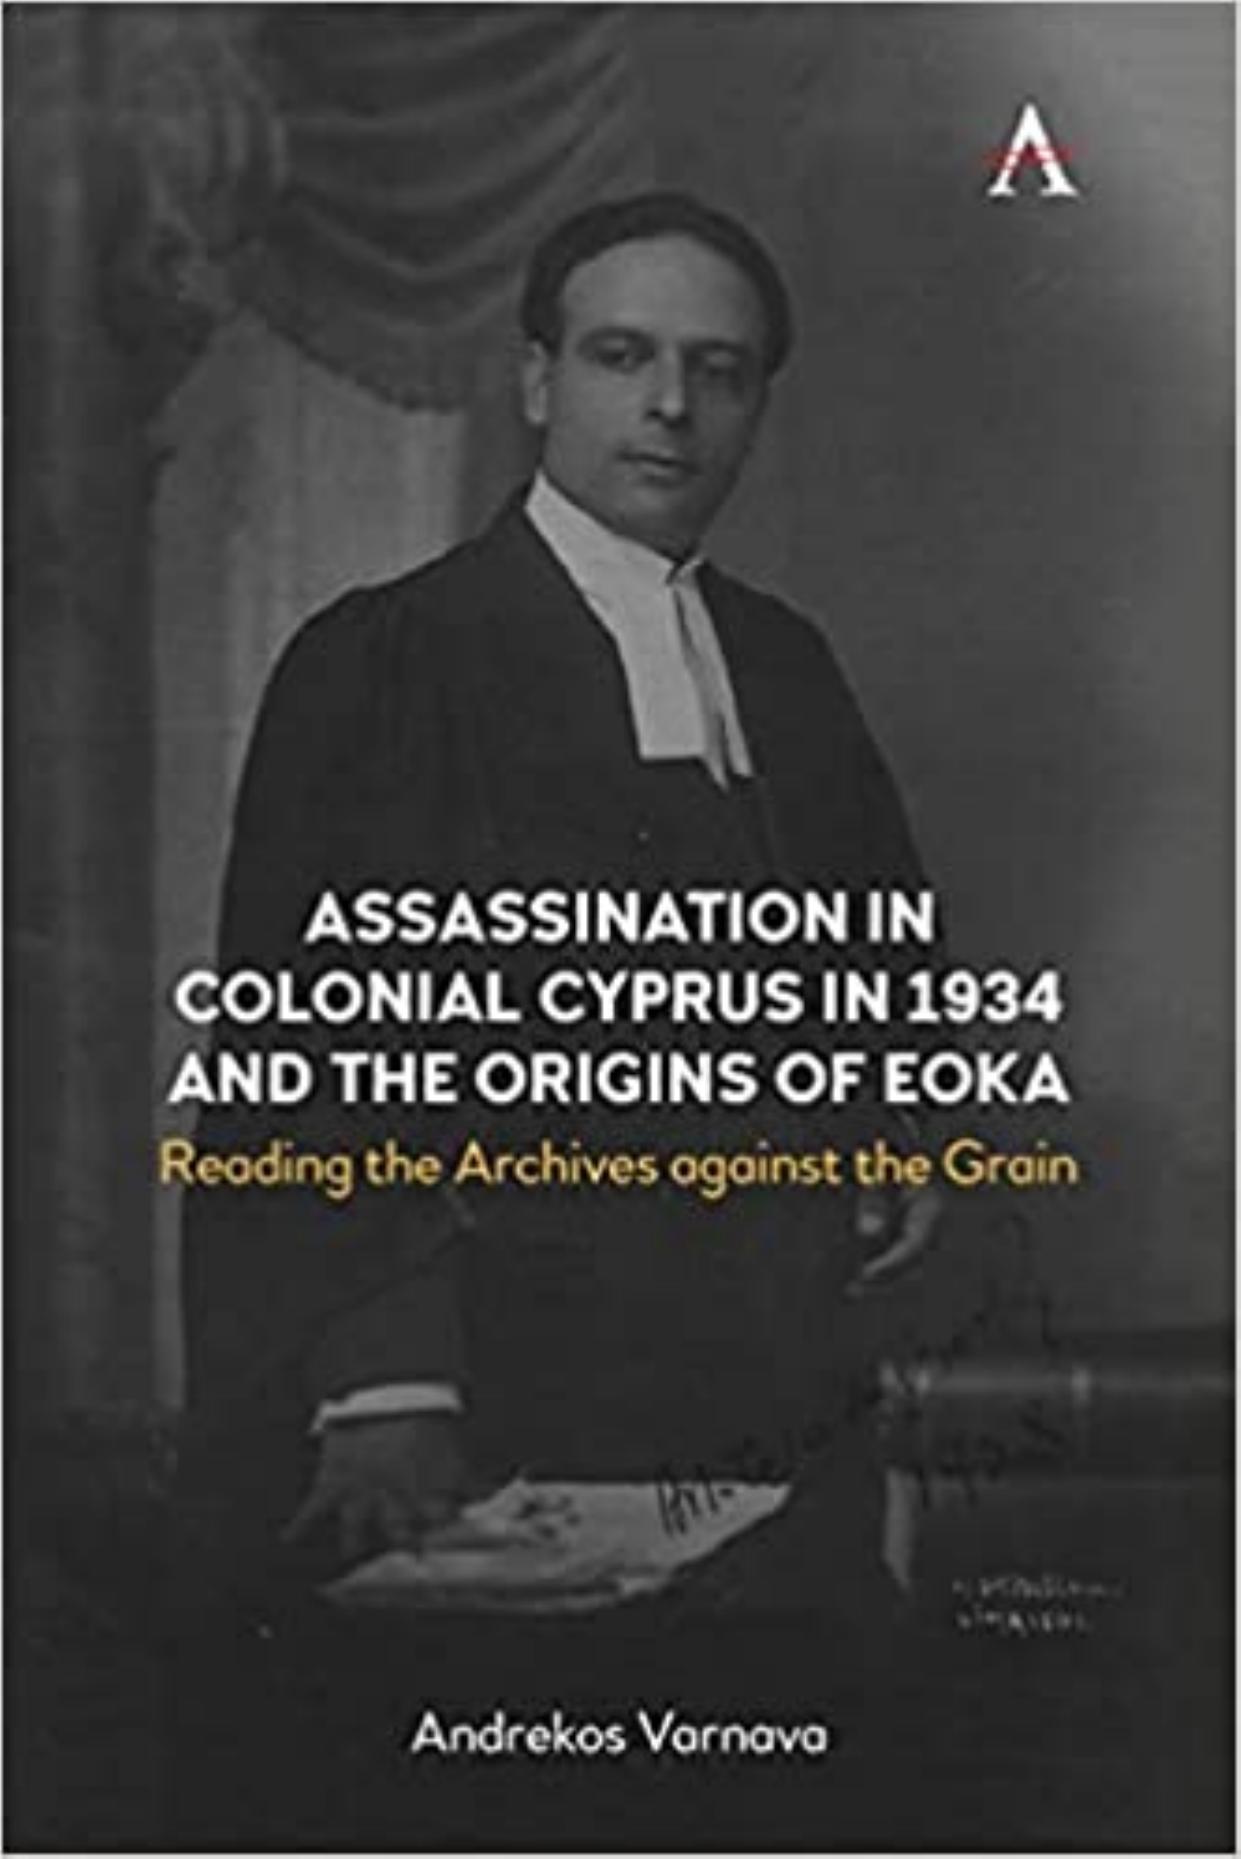 Assassination in Colonial Cyprus in 1934 and the Origins of EOKA: Reading the Archives against the Grain (Anthem Studies in British History) by Andrekos Varnava